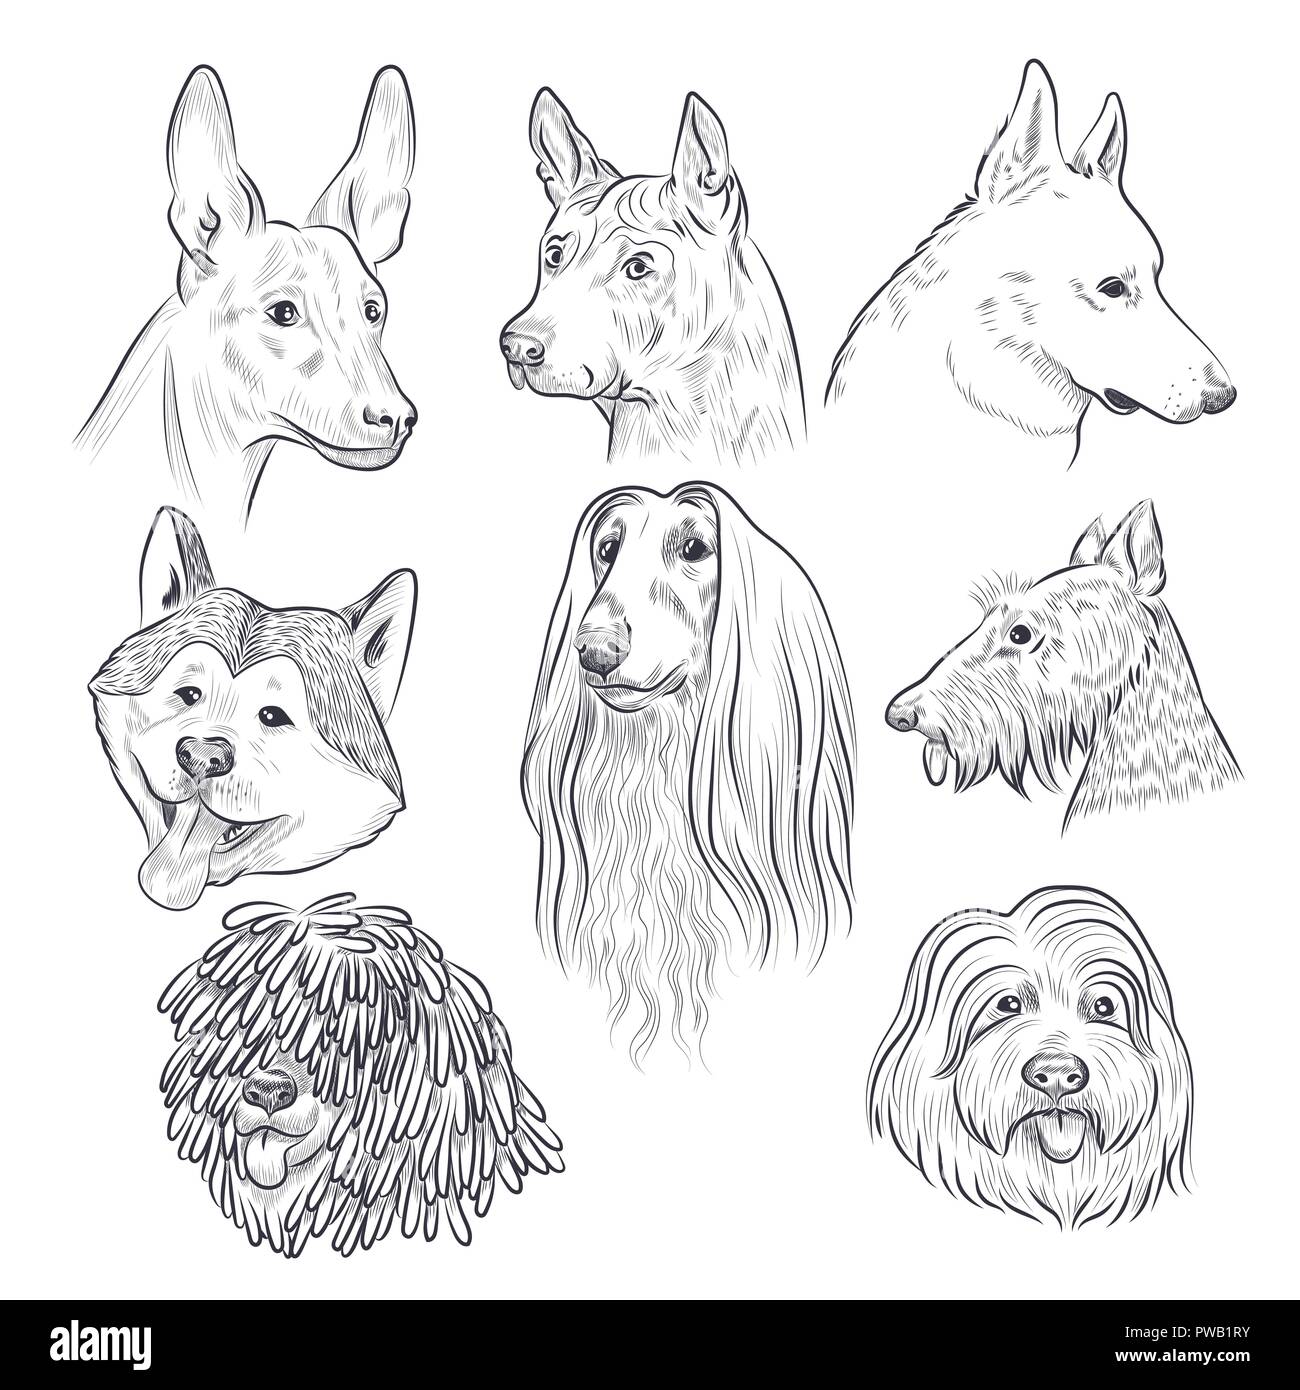 Purebred dog head sketch. Rare canine breeds. Hand drawn dog vector collection isolated on white background. Stock Vector